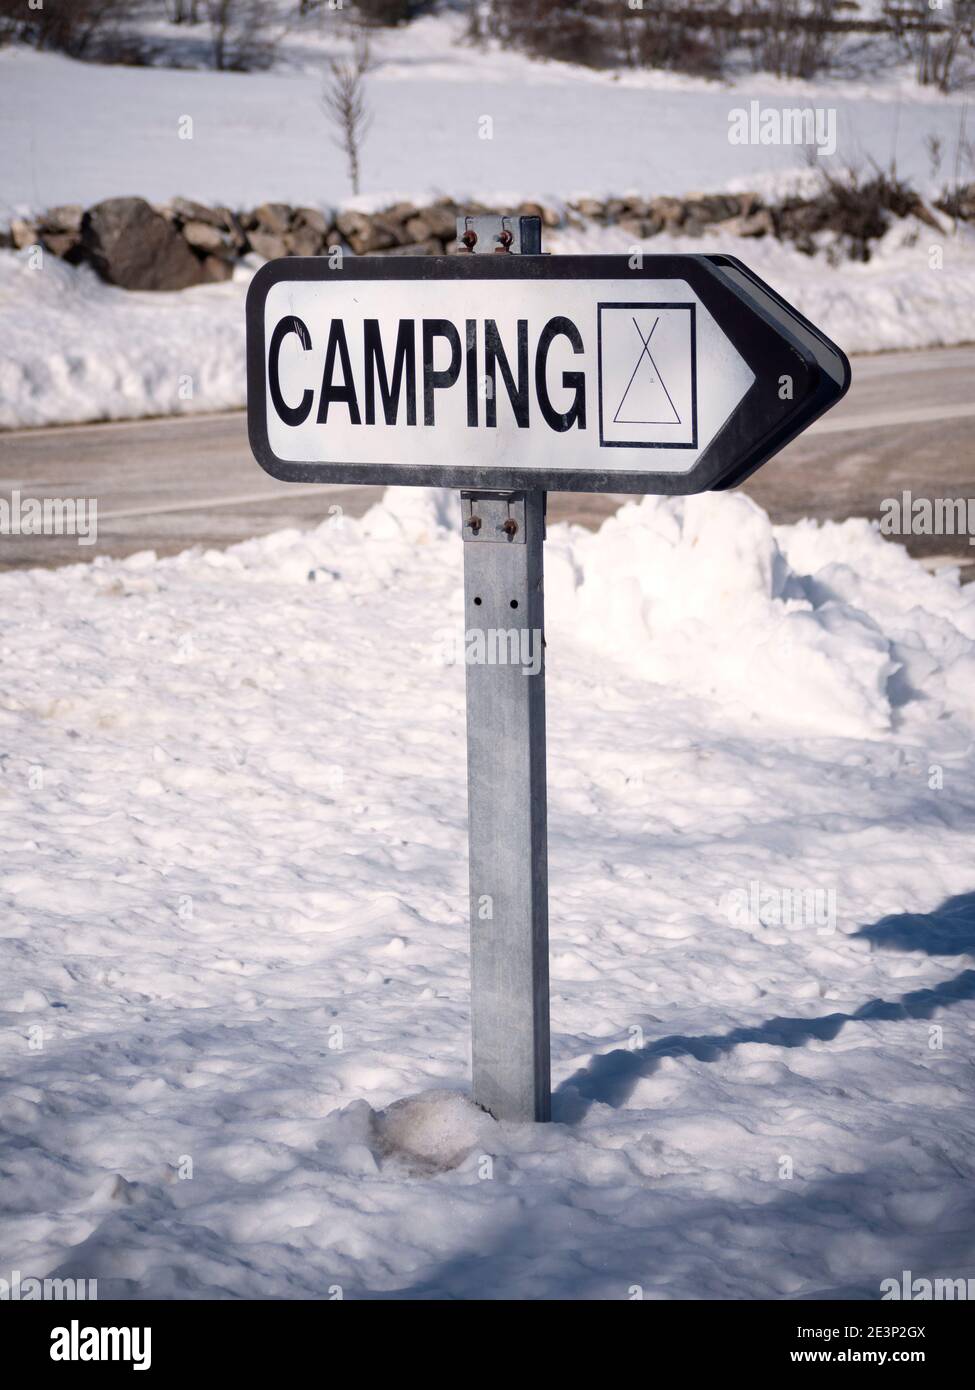 Camping sign and road in a winter snowy background. Stock Photo